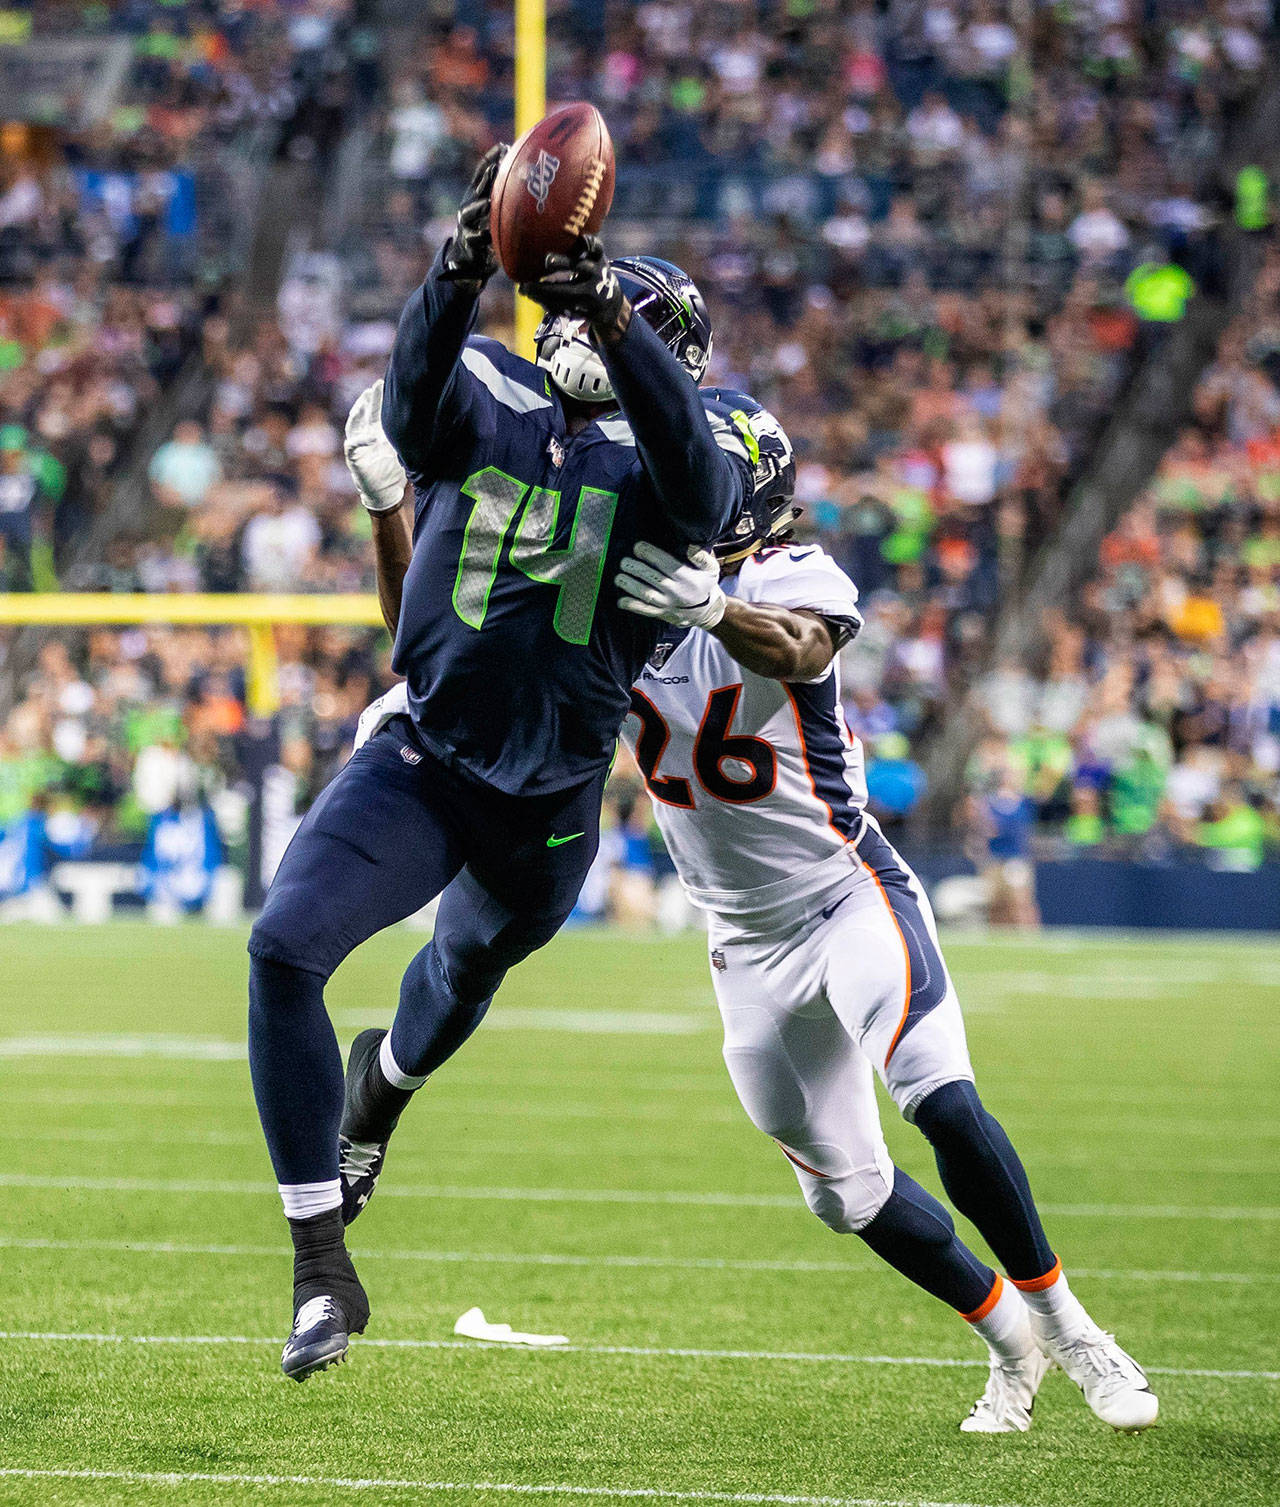 Seattle Seahawks wide receiver D.K. Metcalf (14) is unable to haul in a deep pass against the Denver Broncos’ Isaac Yiadoma (26) during a preseason game on Thursday, Aug. 8. The much-hyped second round pick had knee surgery on Tuesday. (Dean Rutz/Seattle Times/TNS)